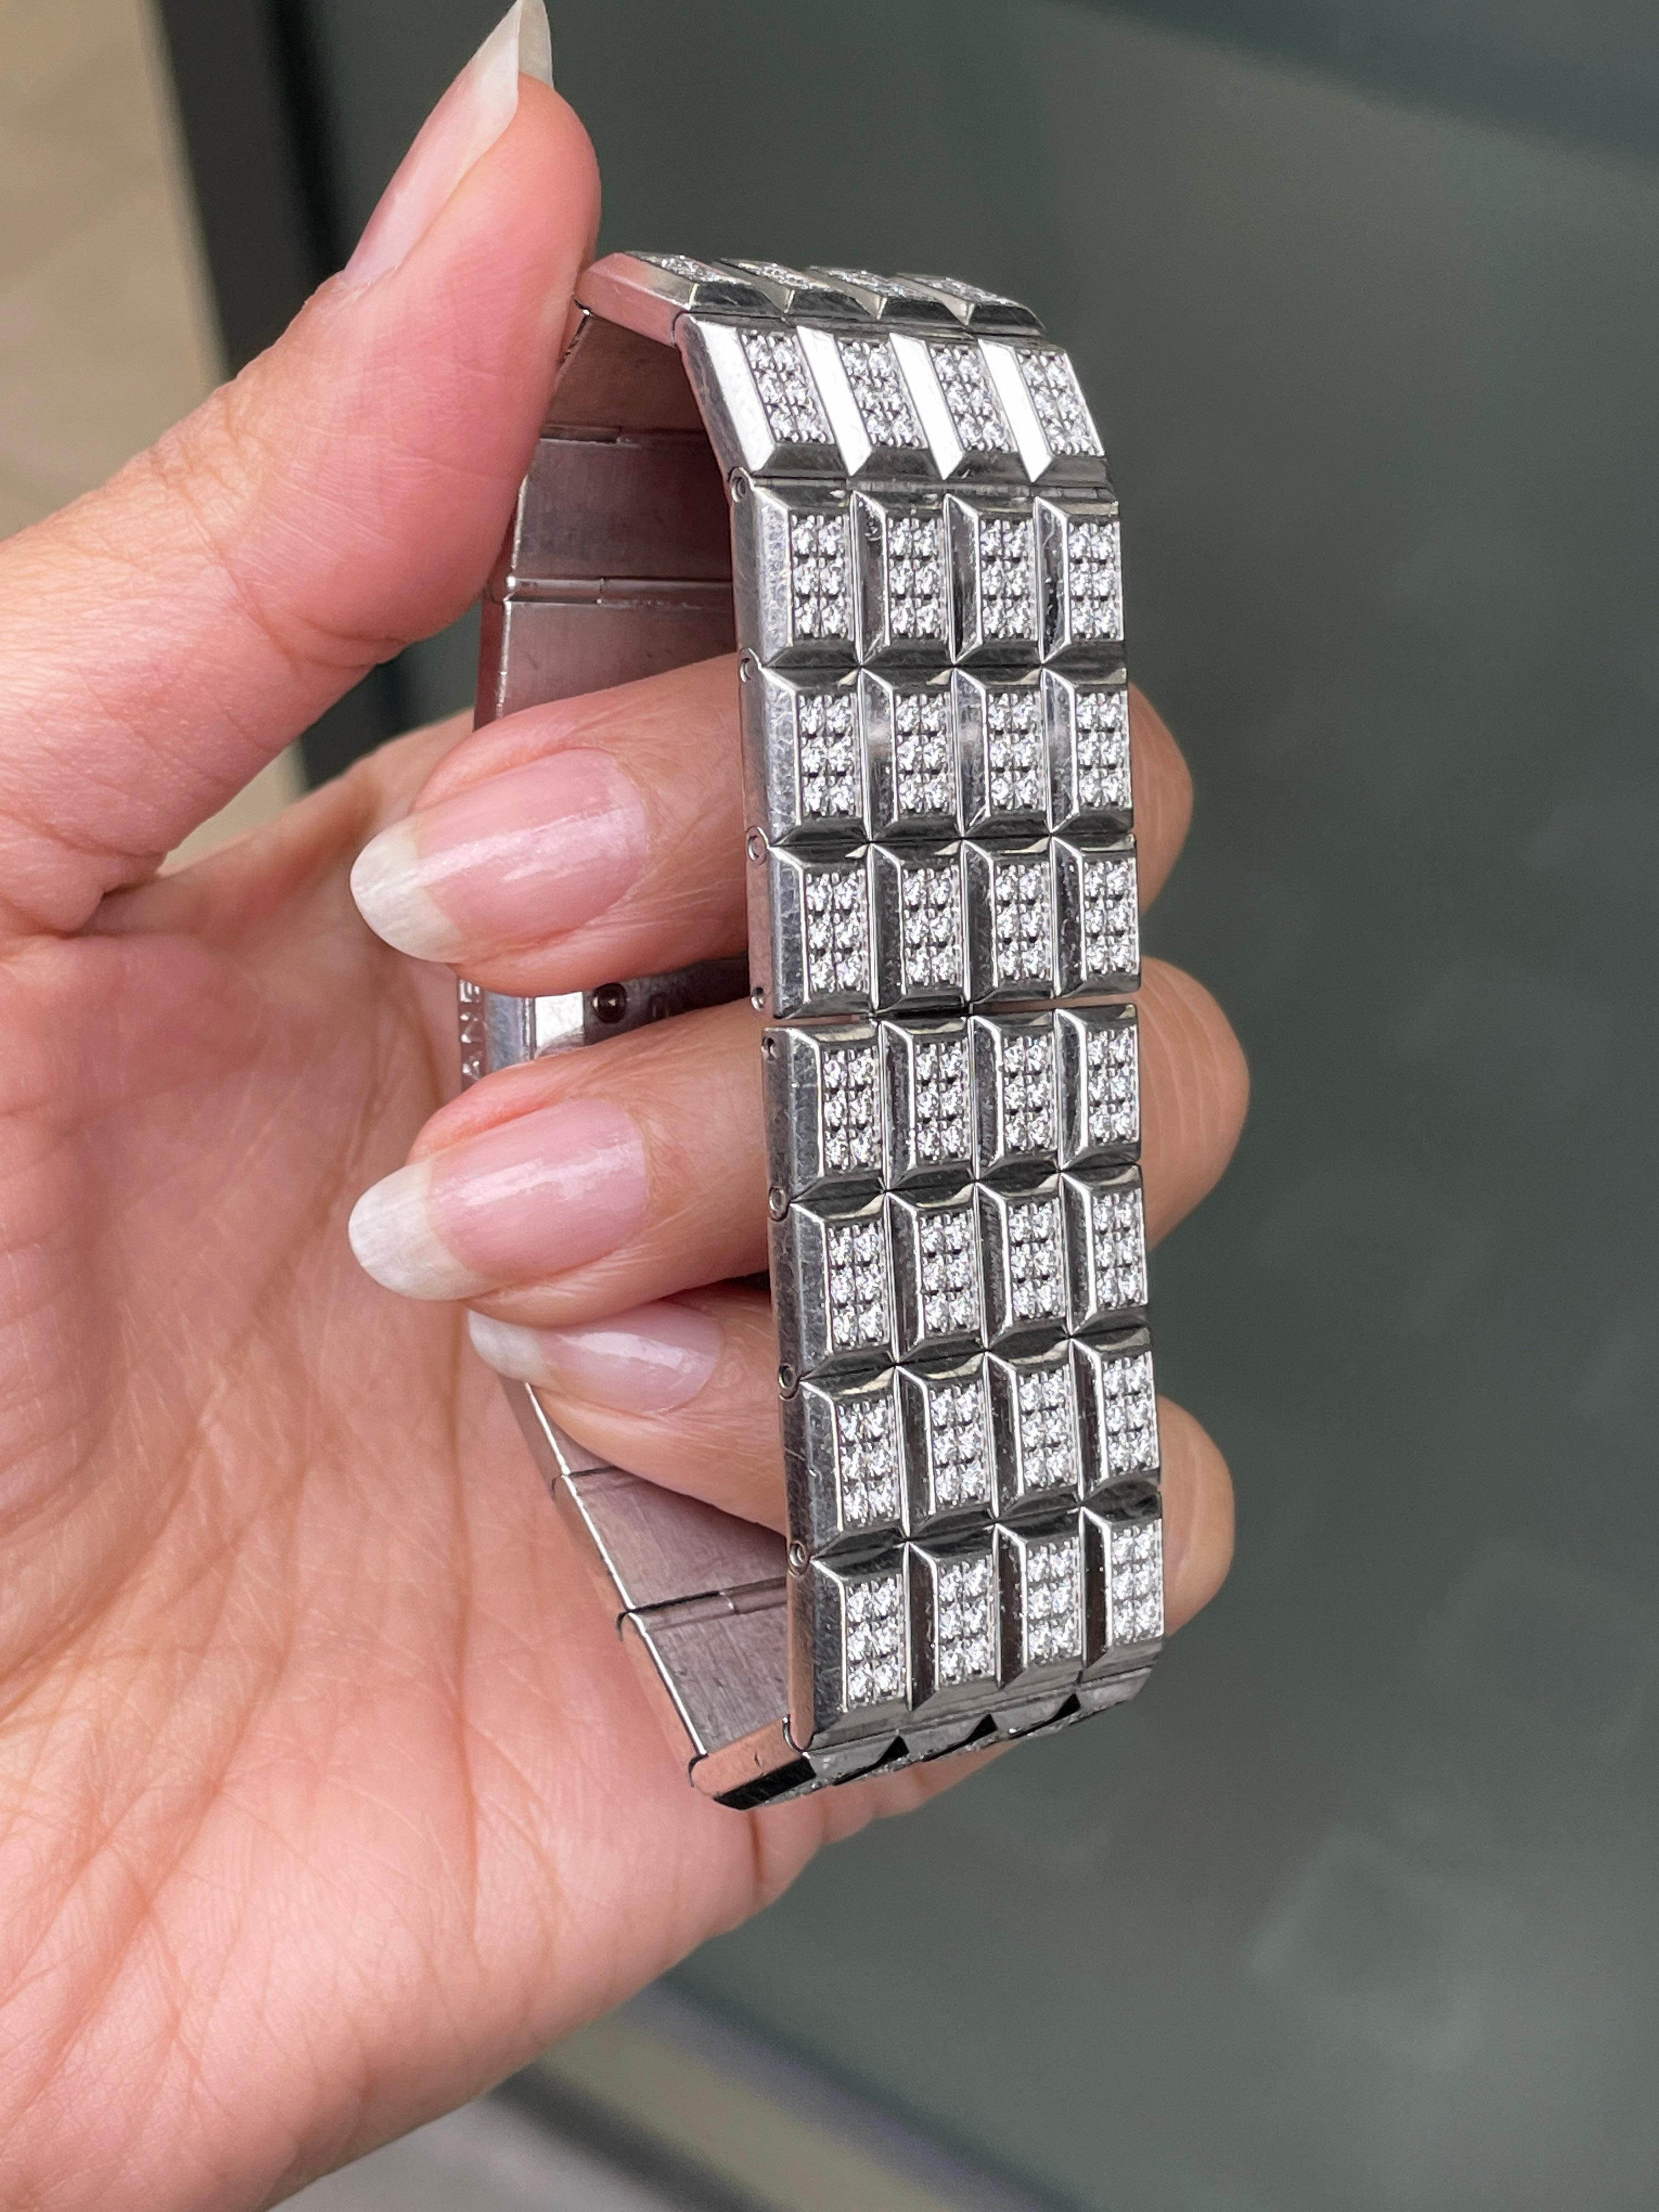 CHANEL Chocolat Diamond and 18 Carat White Gold Digital Watch Nº 14/19 For Sale 1